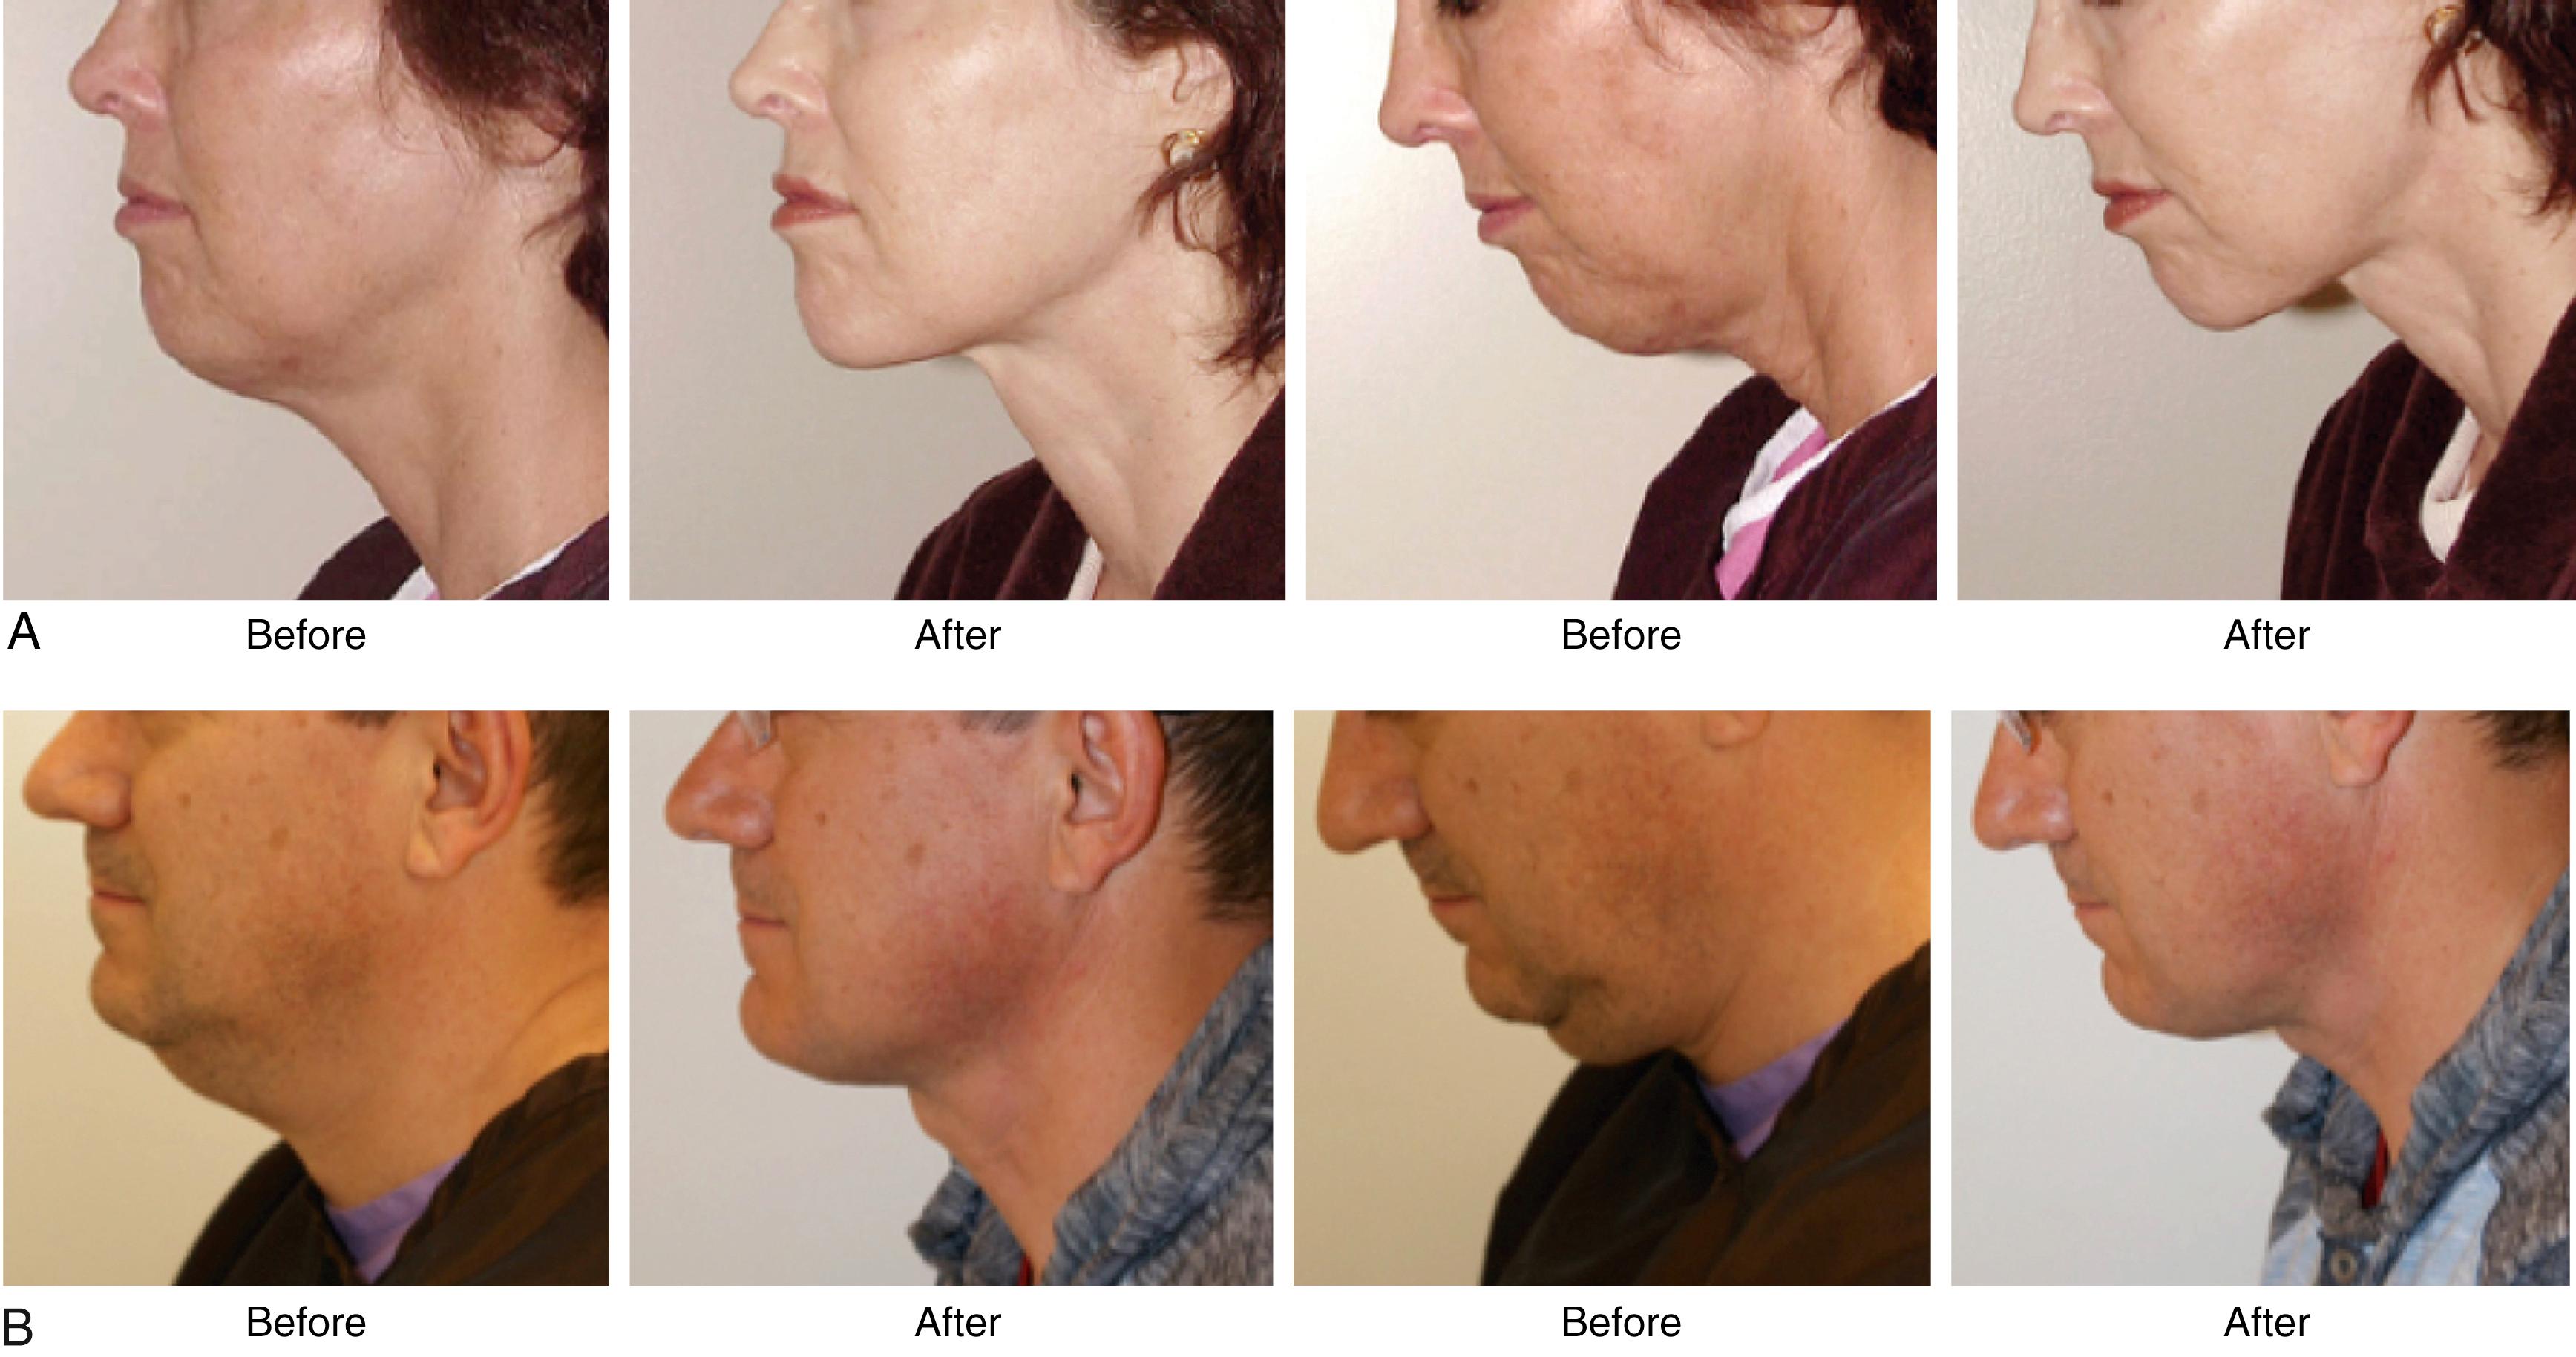 Fig. 67.6, Neck lift with a submental incision only. Although submental liposuction alone will rarely produce optimal neck improvement, a neck lift performed through a submental incision without any removal of skin can create attractive cervical contour in many patients. These patients had their procedures performed through a submental incision only. No incisions were made in the periauricular areas and there are no periauricular scars. Improvement in neck contour was achieved by modifying and reducing subplatysmal structures, not by tightening the skin, removing subcutaneous fat, or by tightening the platysma.